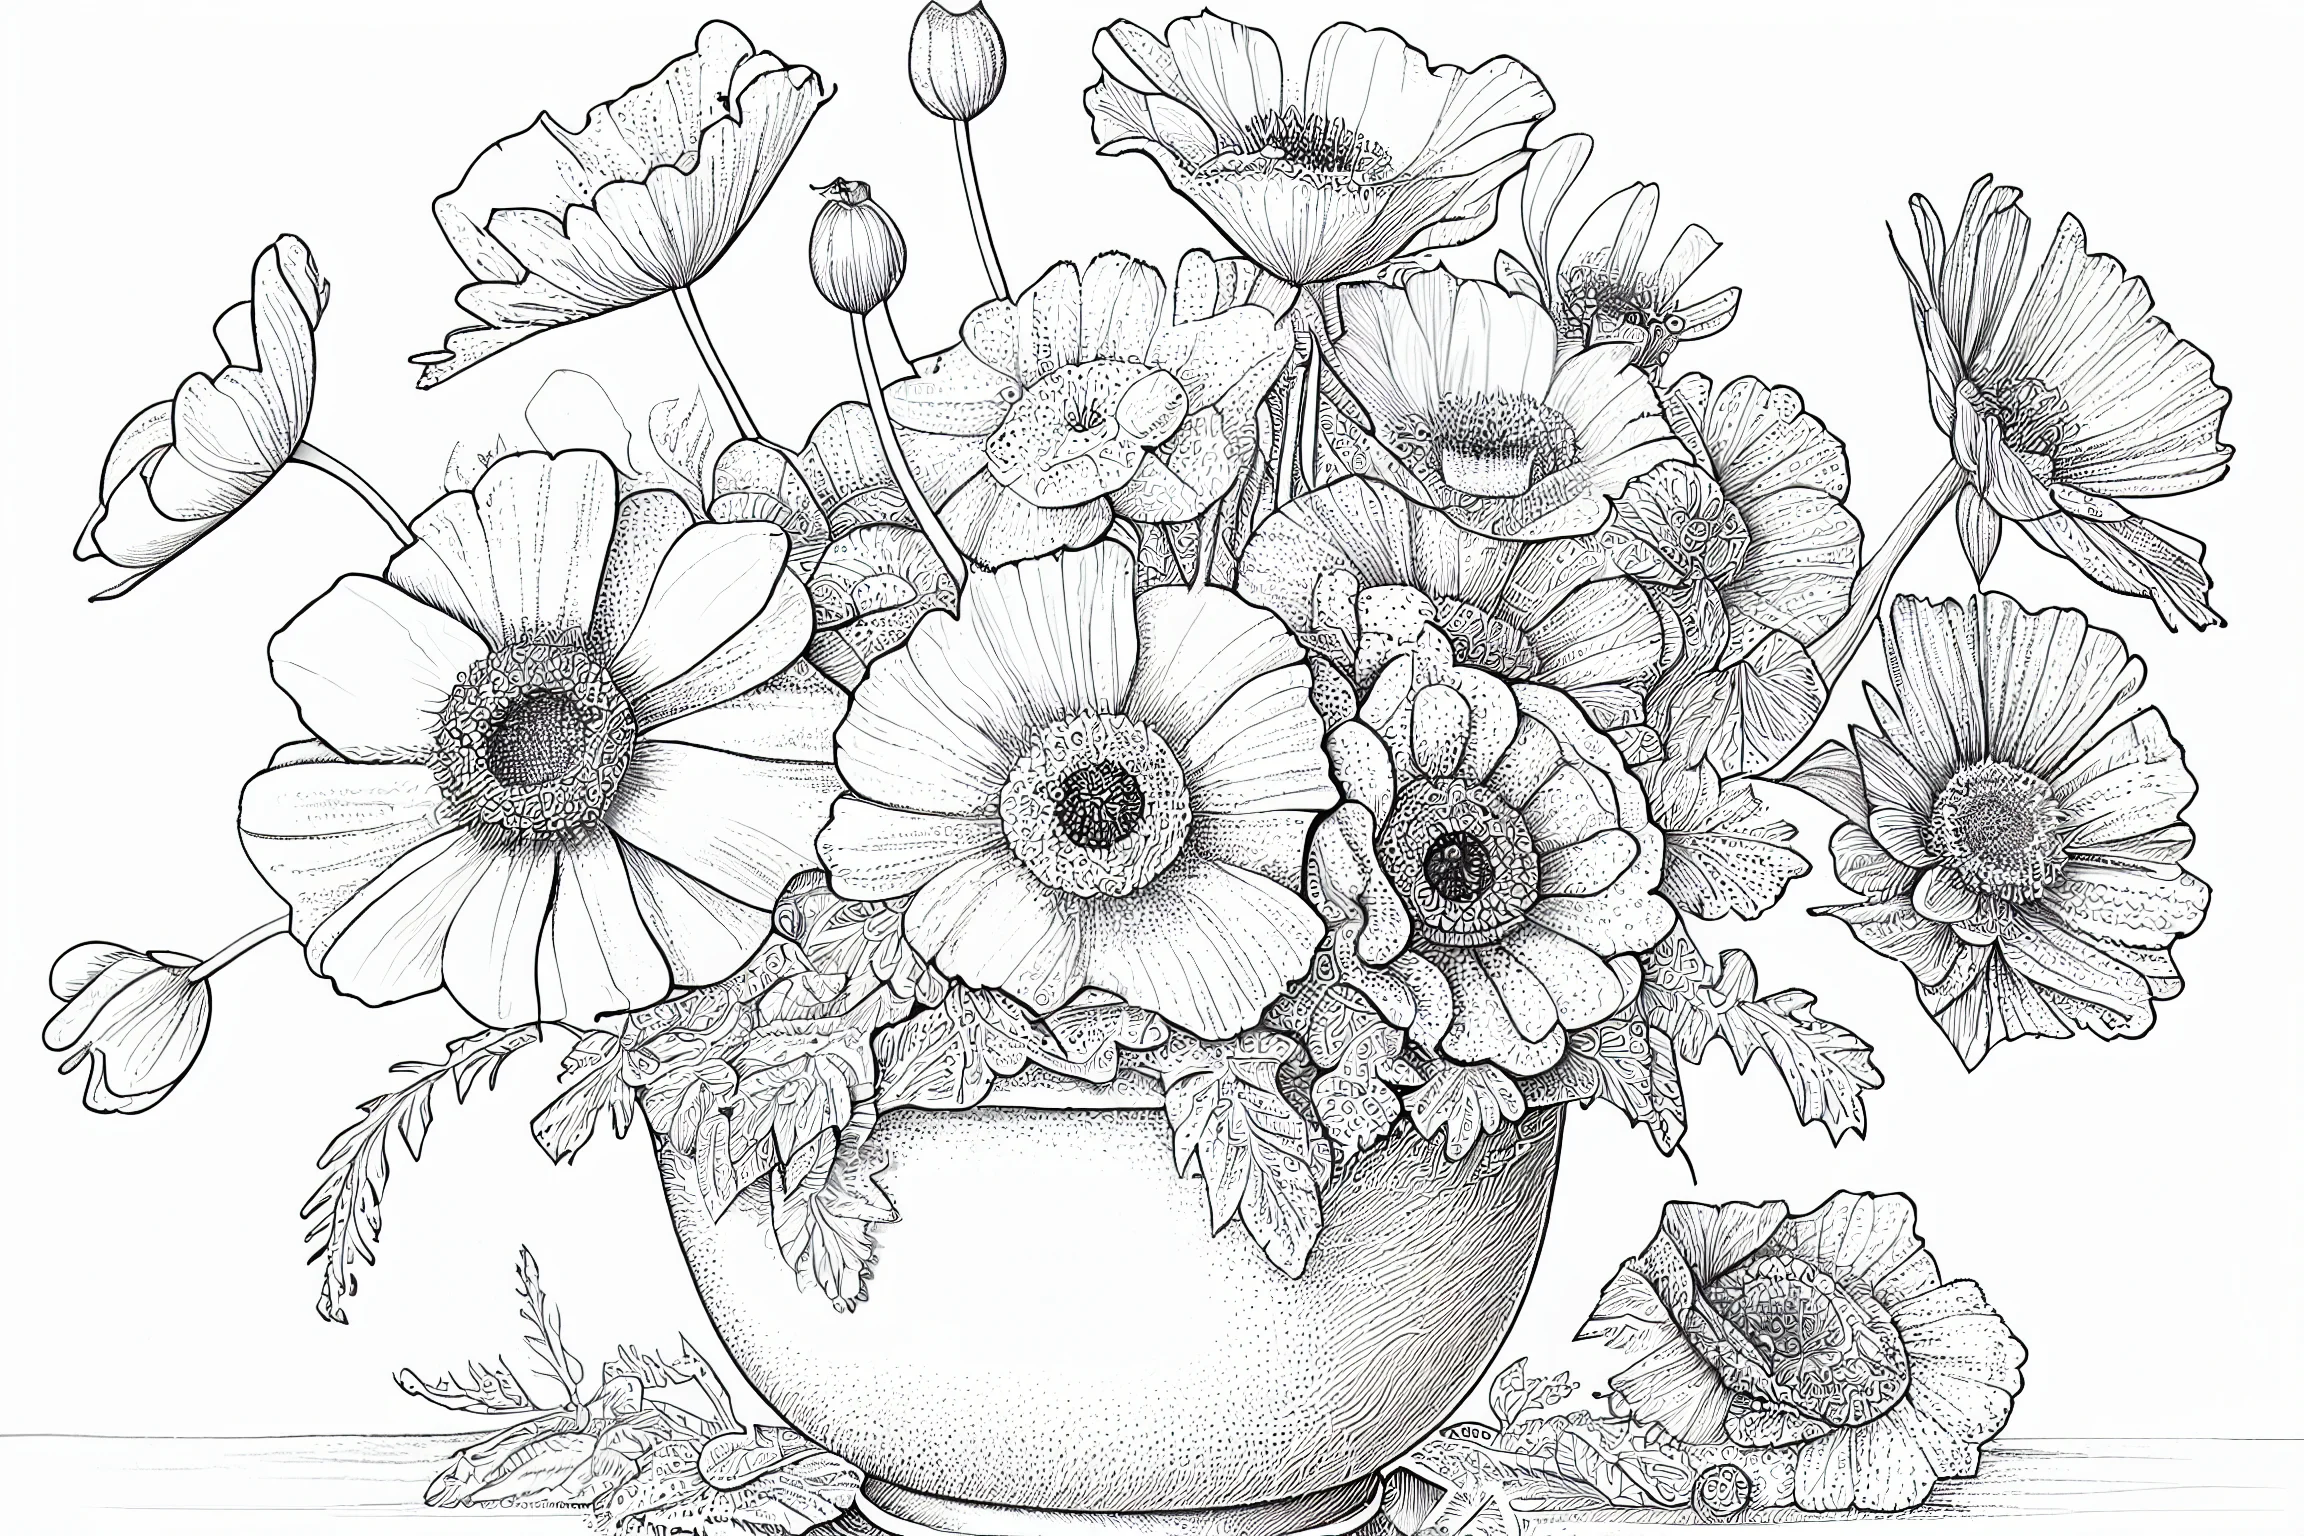 girls planting flowers coloring pages